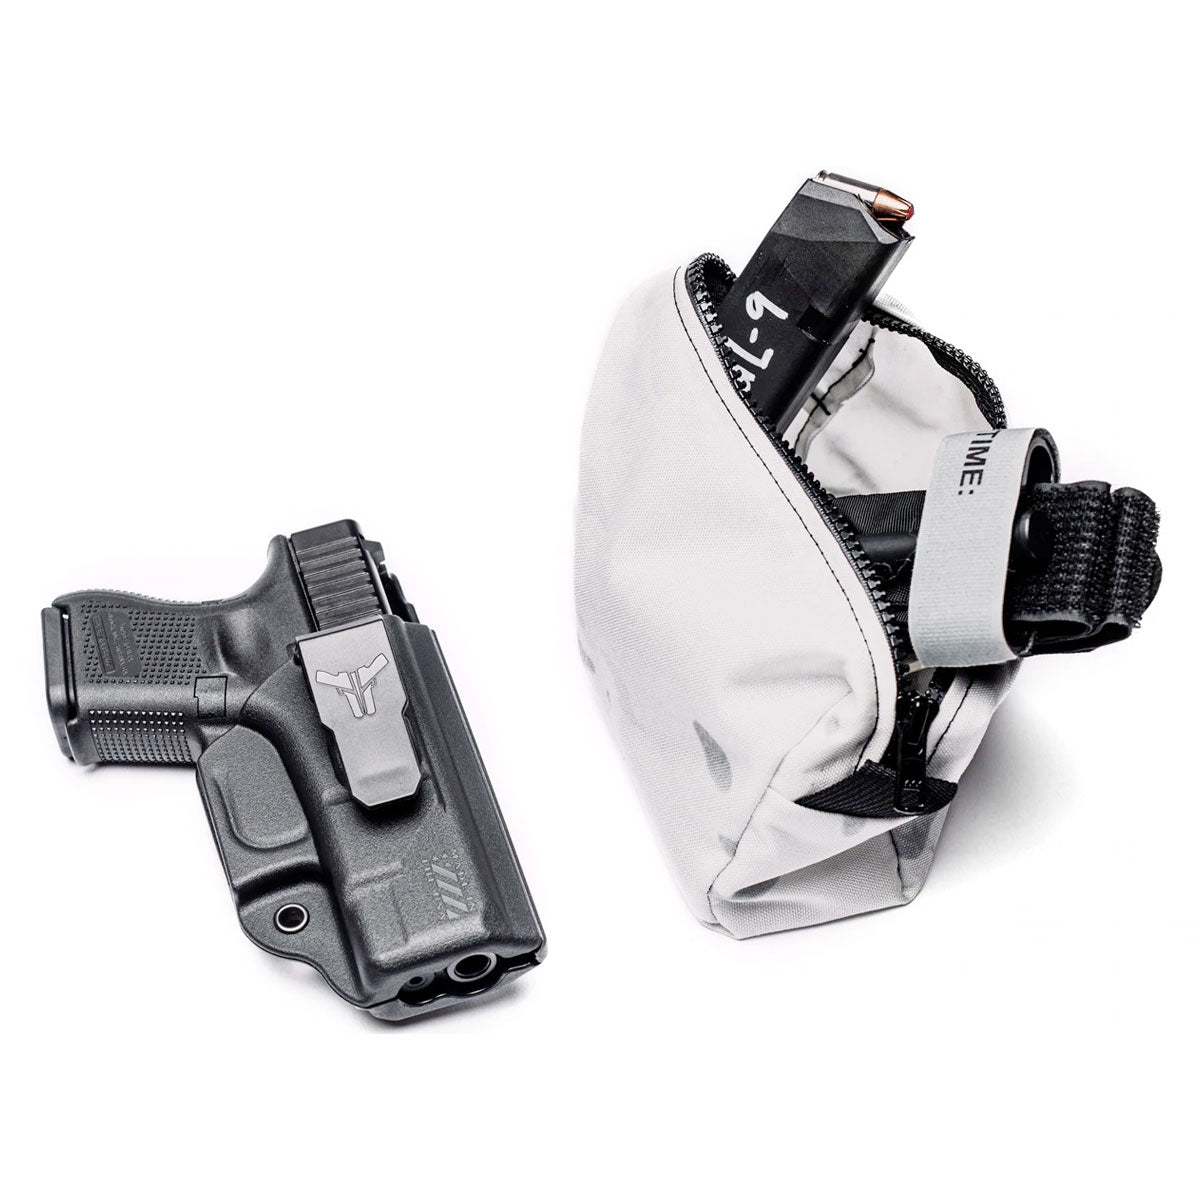 Blade-Tech Klipt IWB Holster Black Right Hand Only Holsters Blade-Tech Holsters Tactical Gear Supplier Tactical Distributors Australia